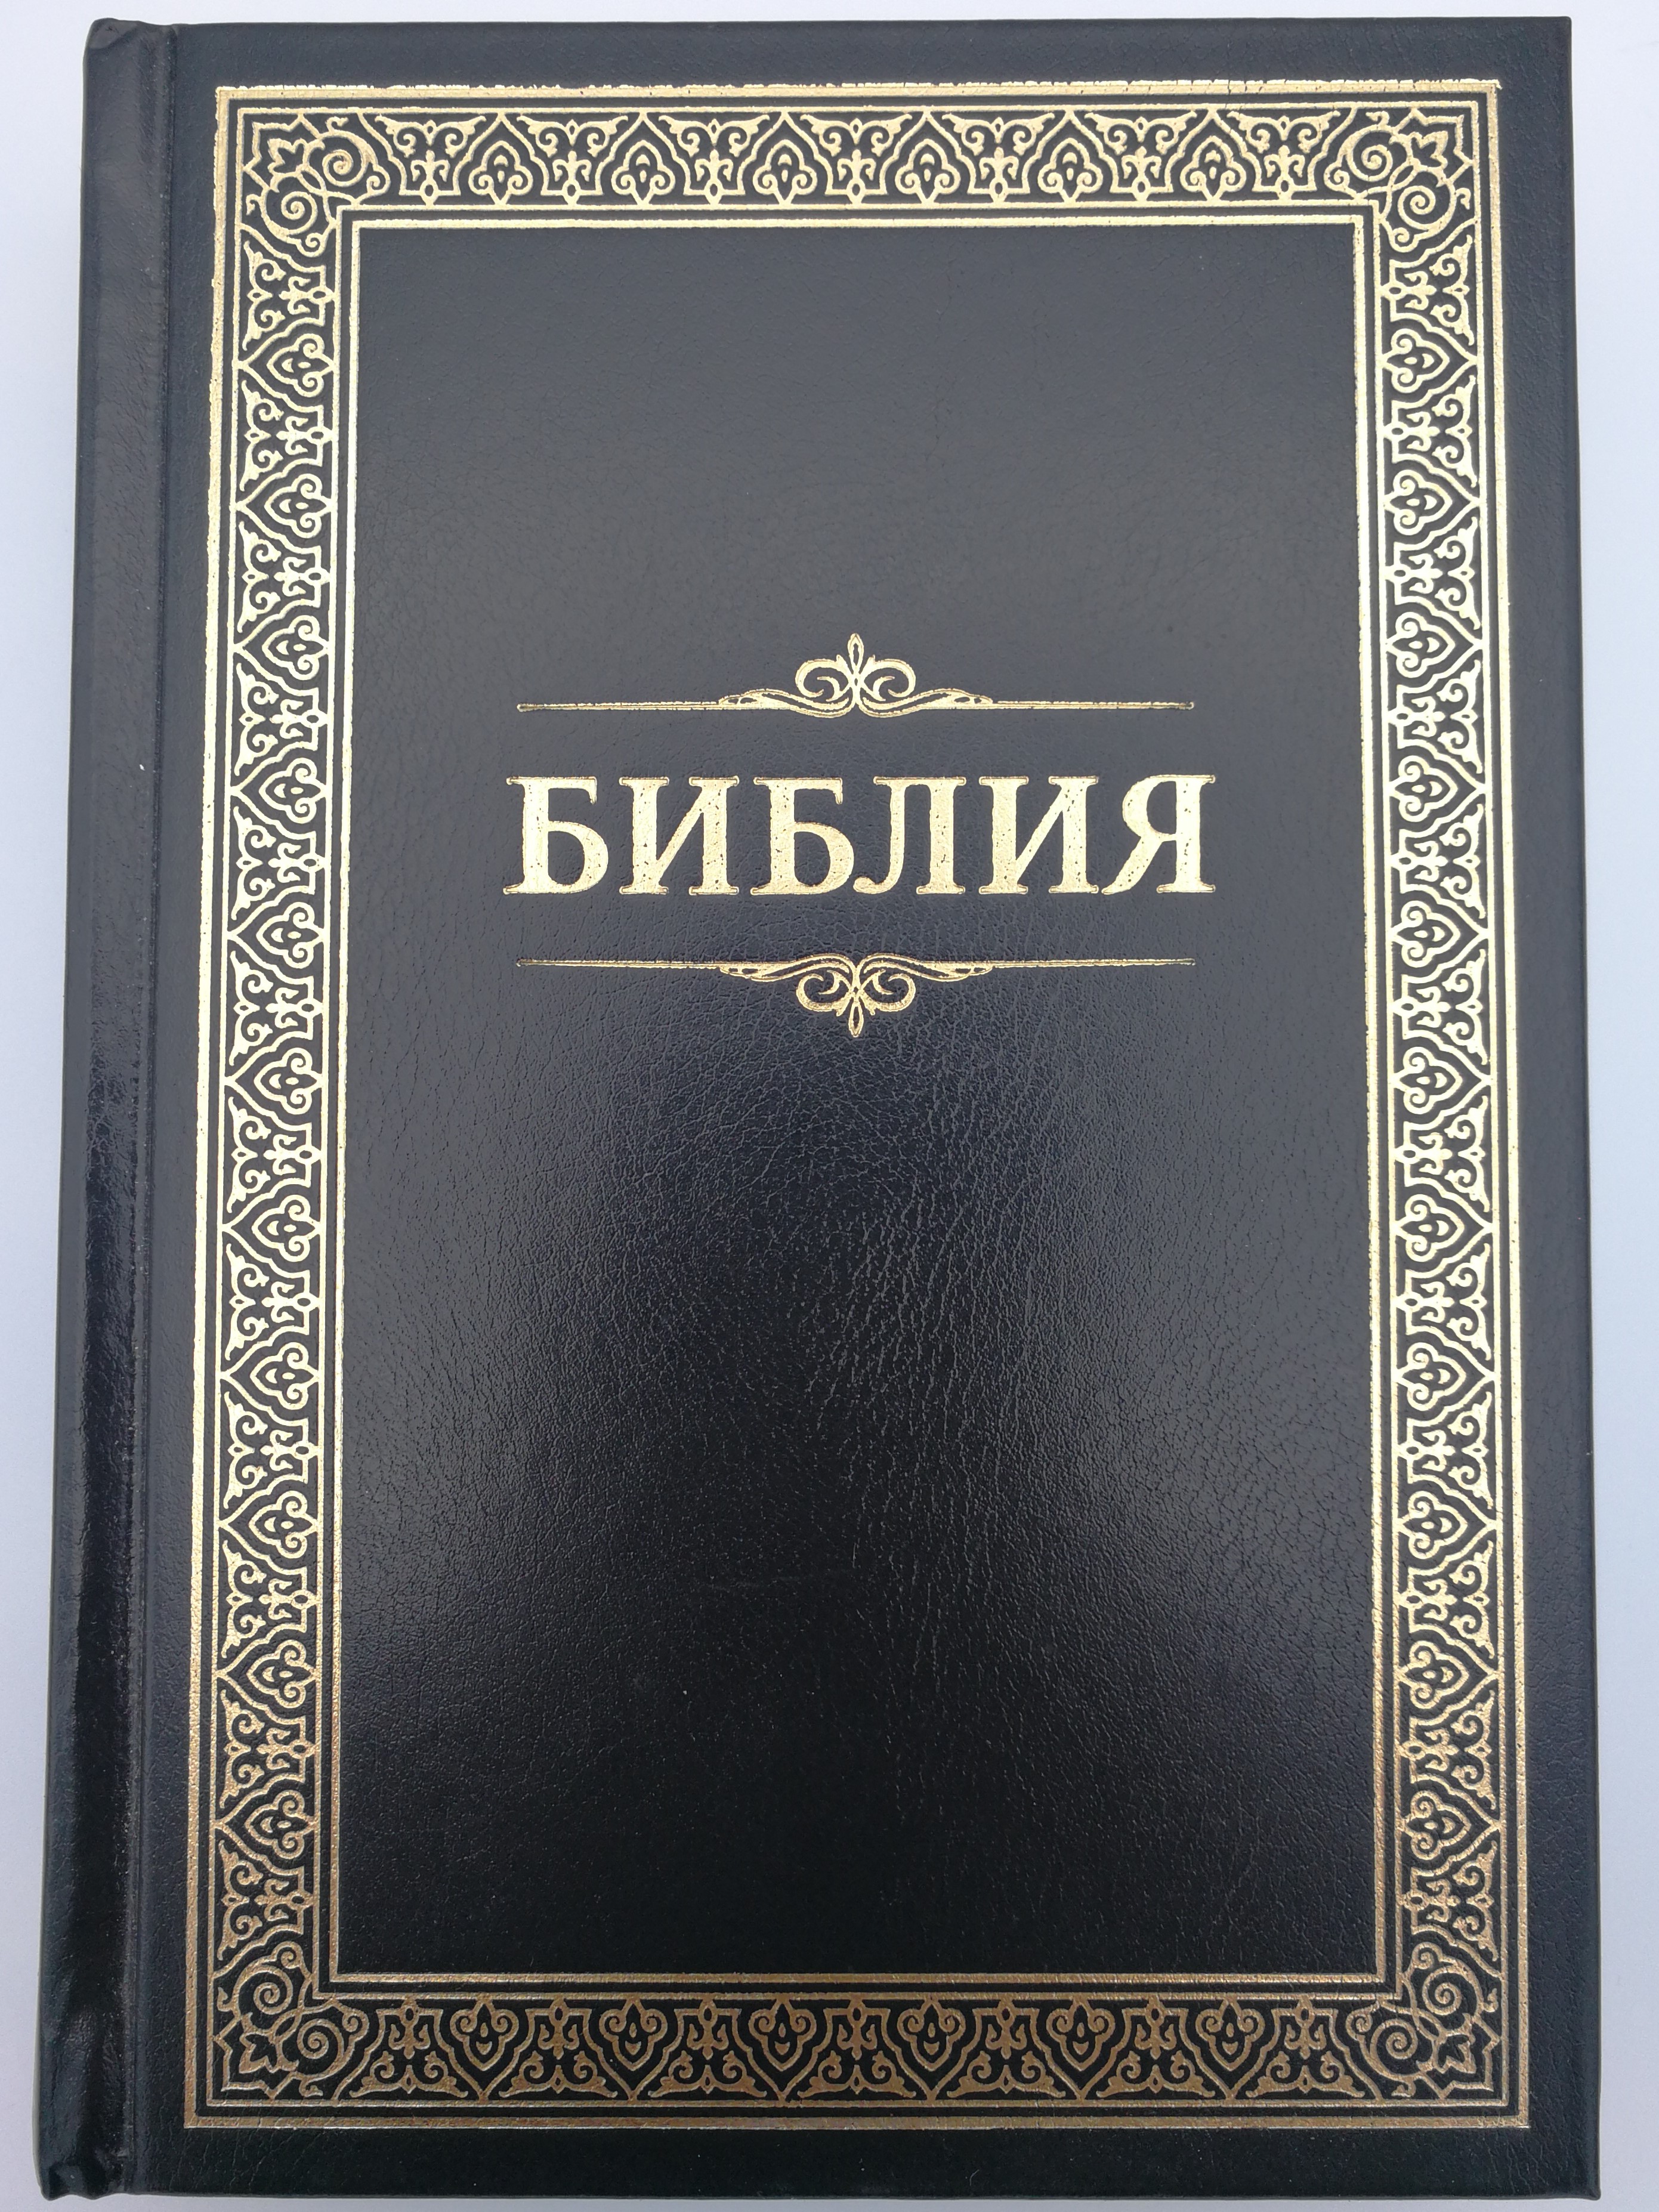 Библия - Russian Bible with parallel passages - Classic Black Hardcover  1